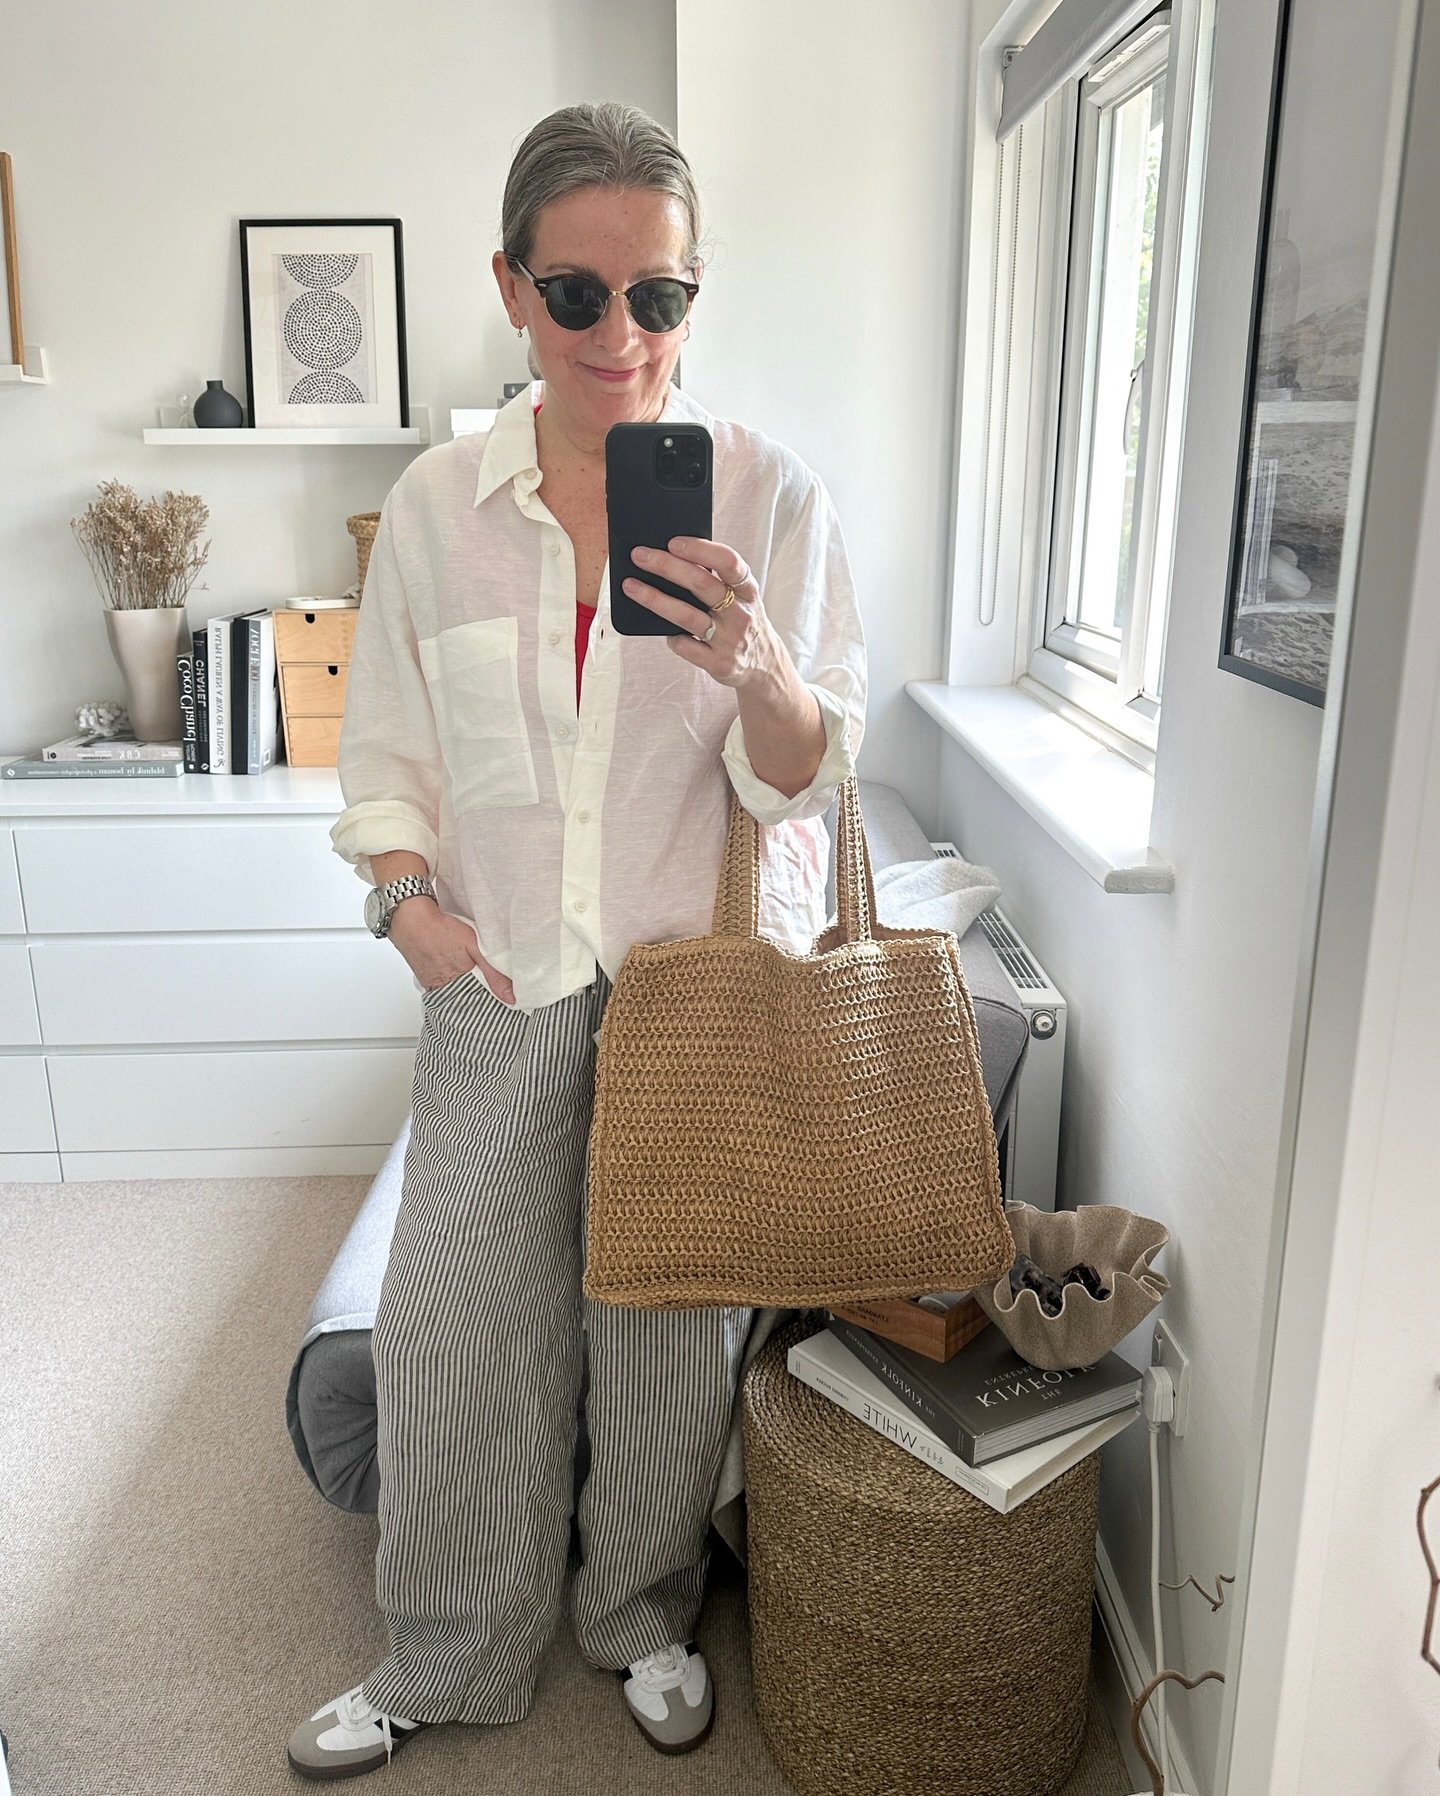 Last year sunny Thursdays were all about dressing for physio - this year its the osteopath... #Osteocore ?  And yep... those trousers again...
⠀⠀⠀⠀⠀⠀⠀⠀⠀
All details 🔝 in May Style
⠀⠀⠀⠀⠀⠀⠀⠀⠀
#springoutfitideas #everydaystyle #linentrousers #linenshir